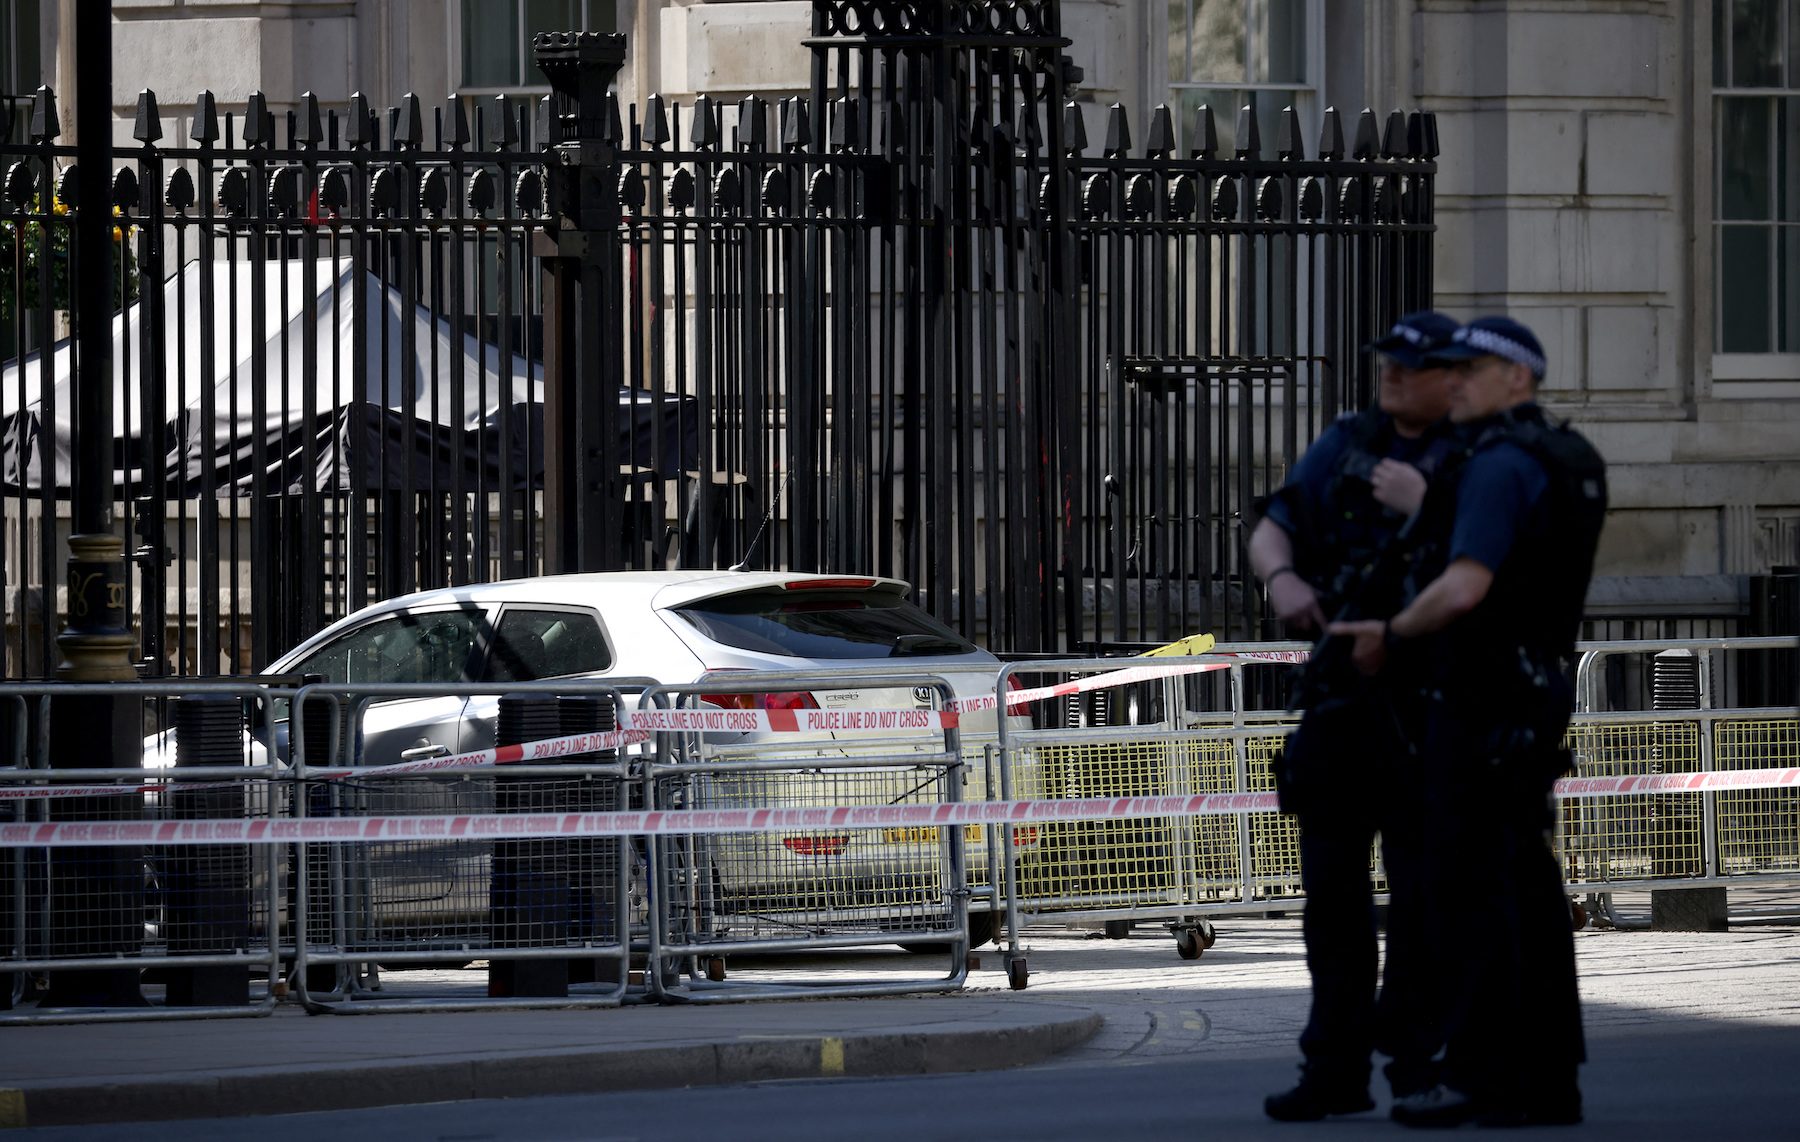 Downing Street car collision not being treated as ‘terror-related,’ say UK police